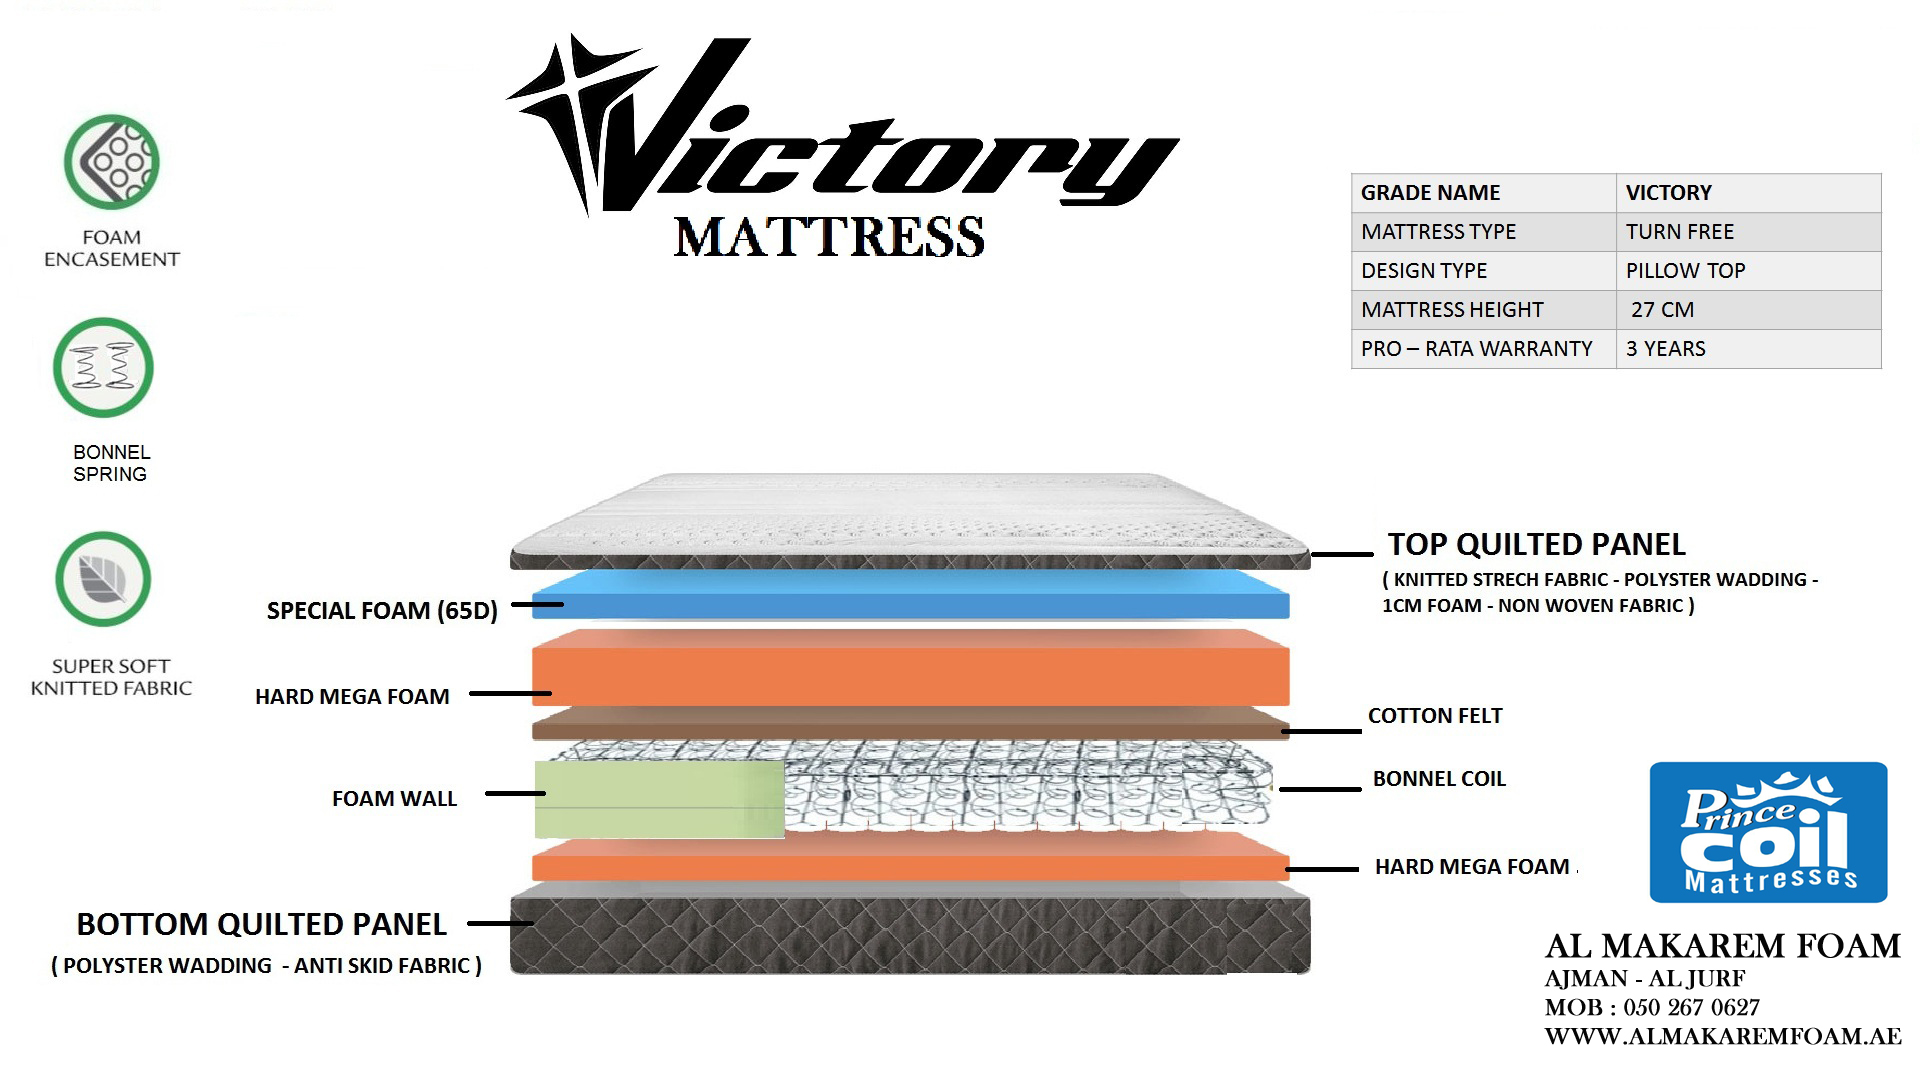 victory furniture and mattress